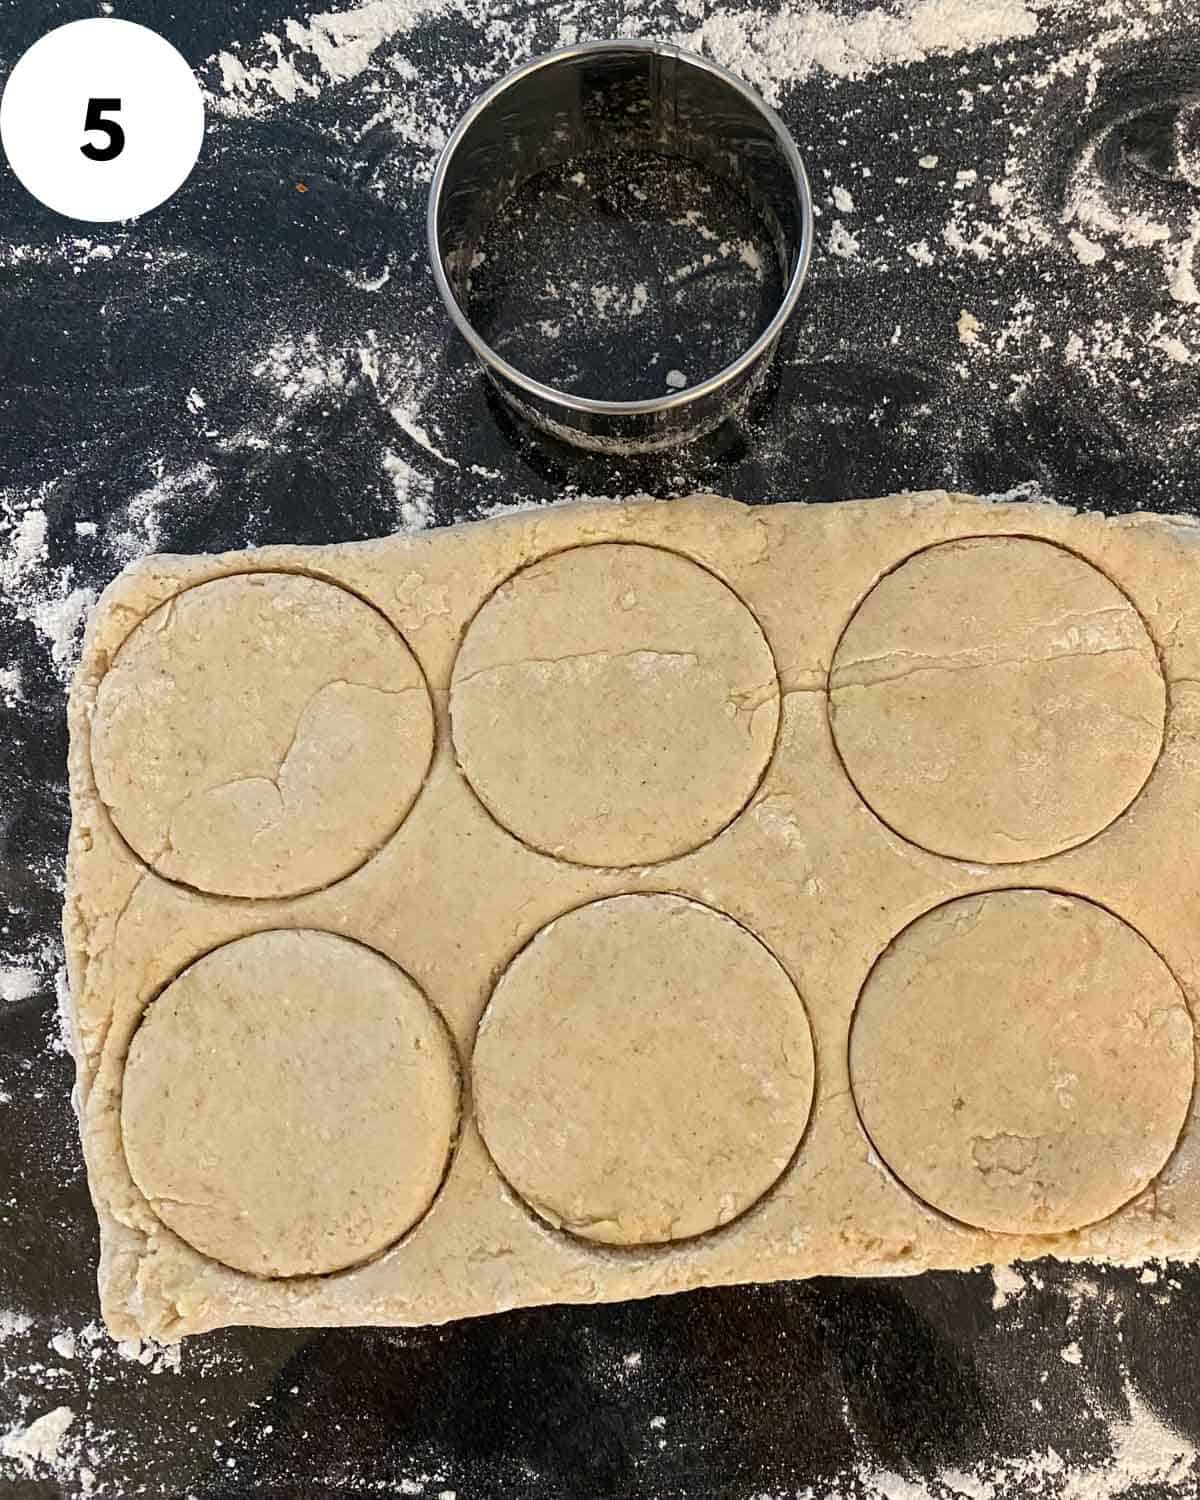 biscuits being cut from dough